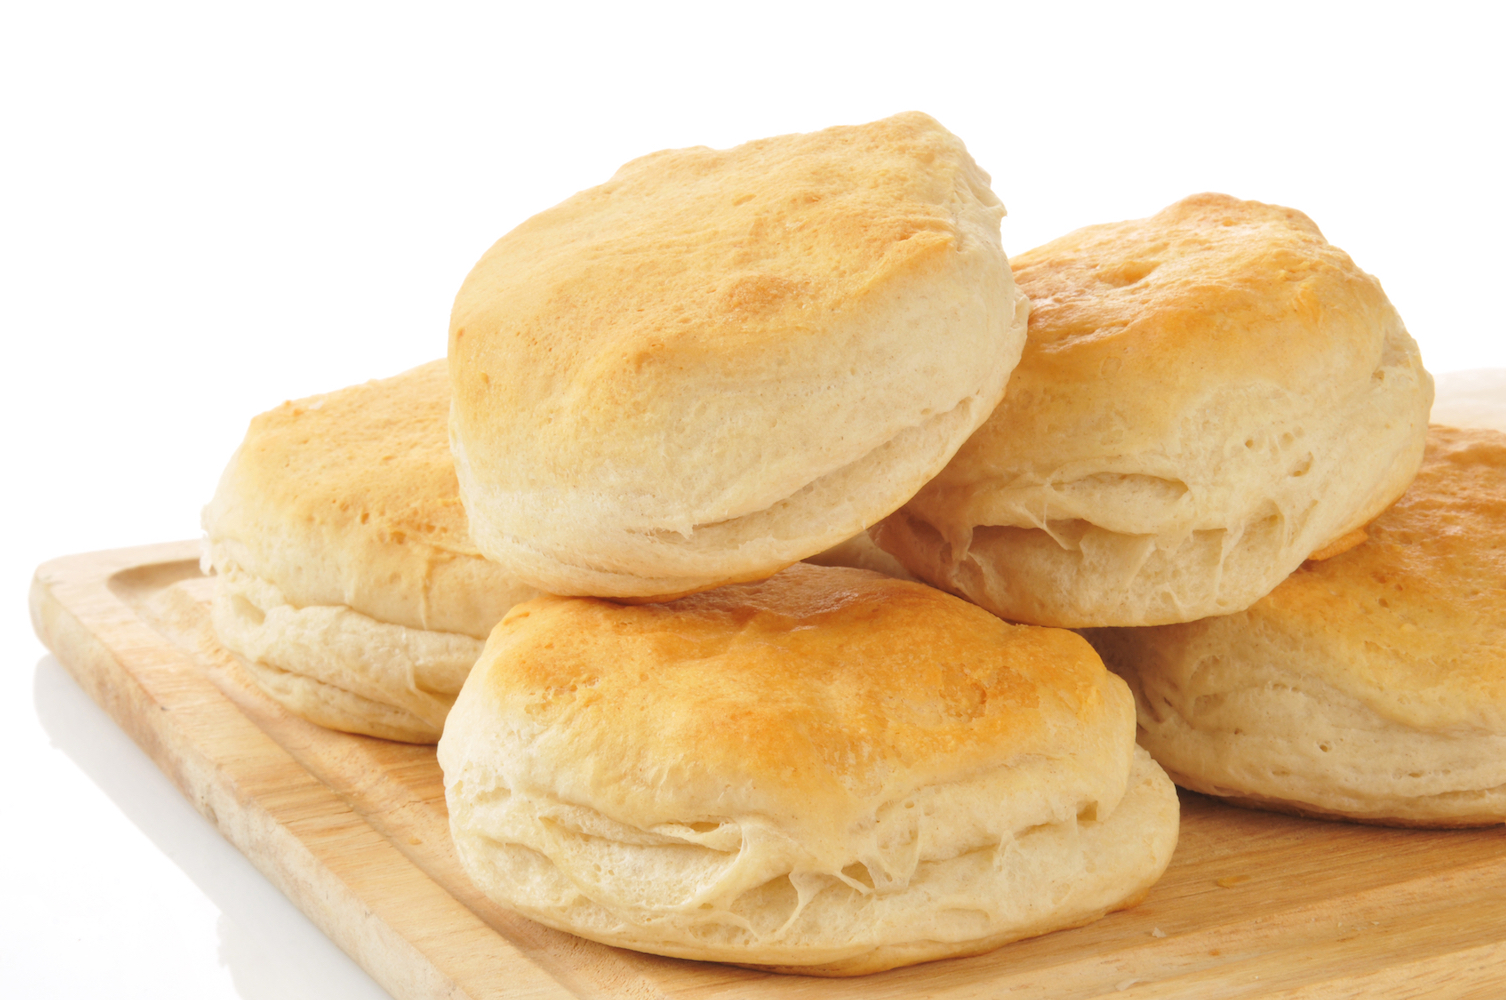 Good Flour Makes Good Biscuits